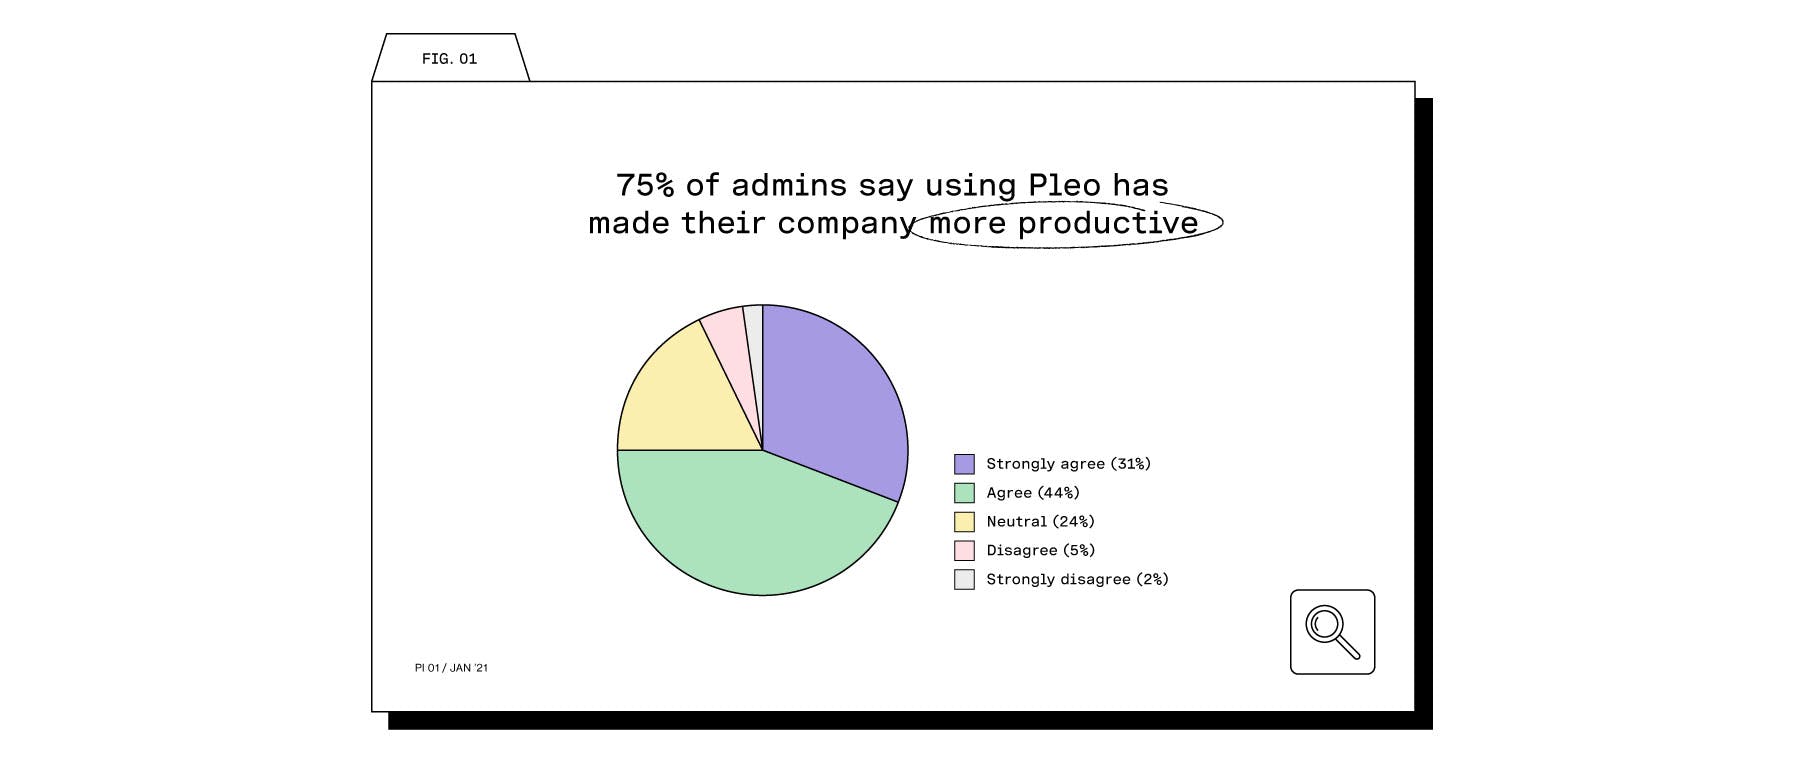 75% of admins are more productive using Pleo